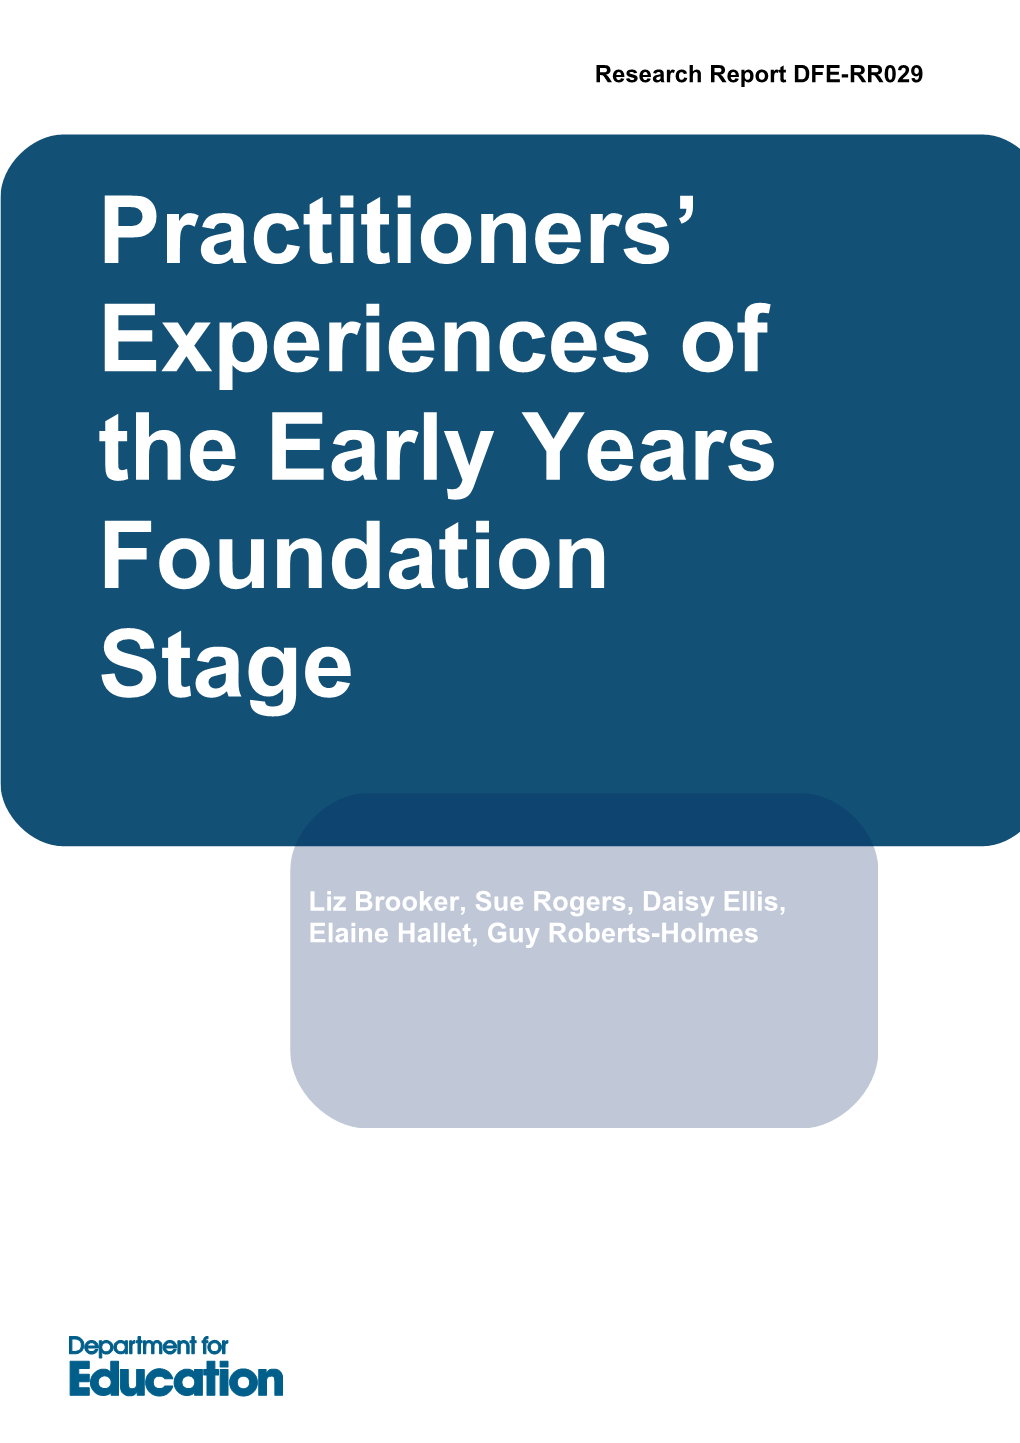 Practitioners Experiences of the Early Years Foundation Stage